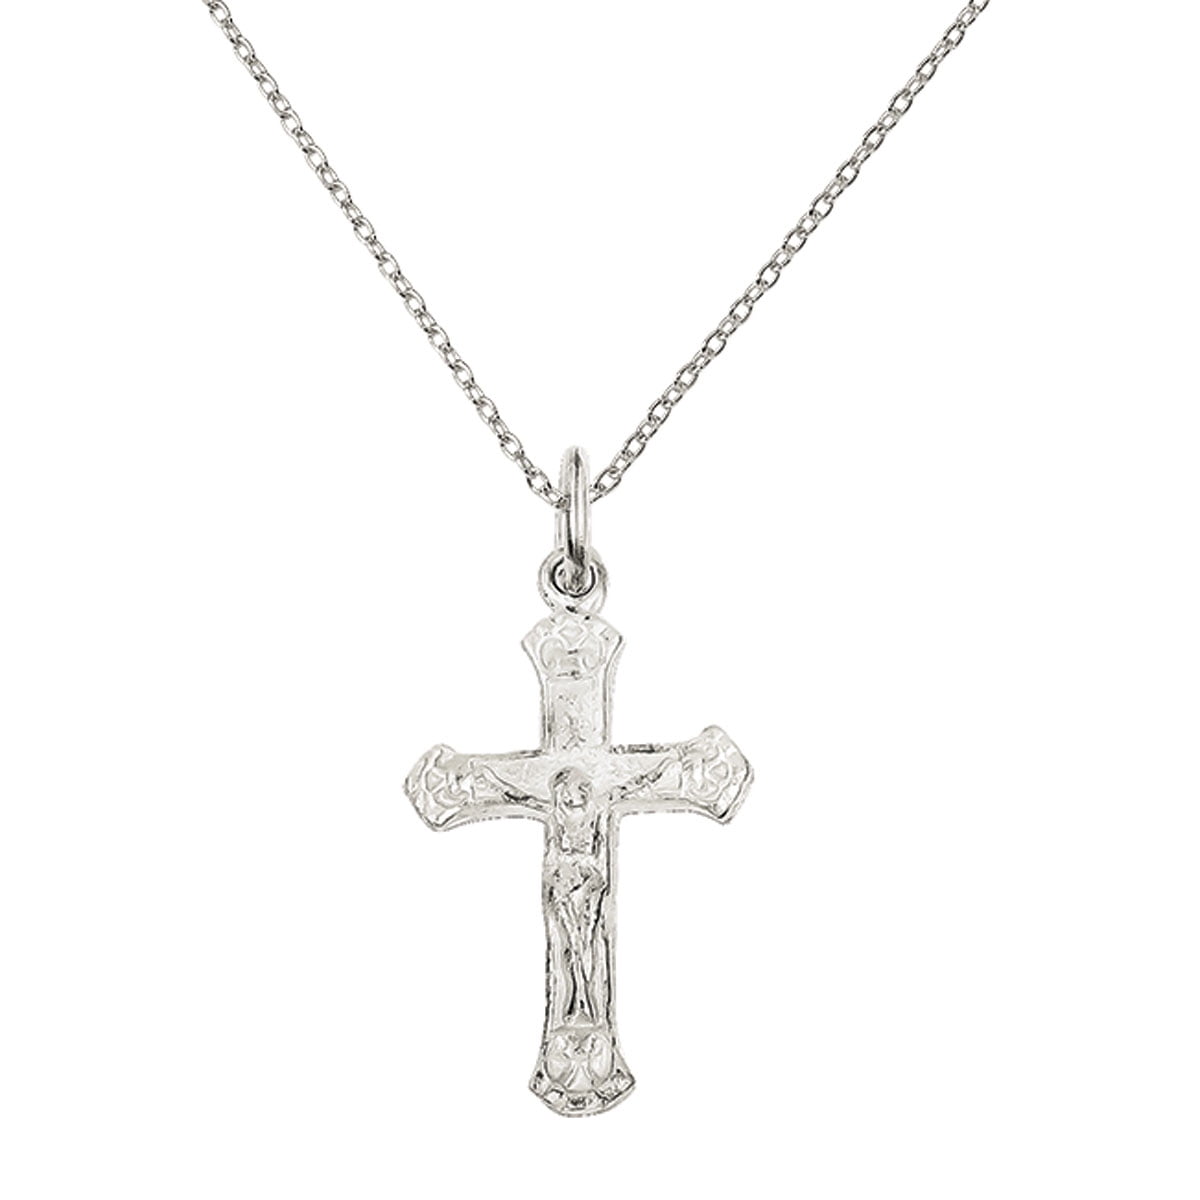 Sterling Silver Crucifix Cross Pendant Necklace 18 inch Chain 